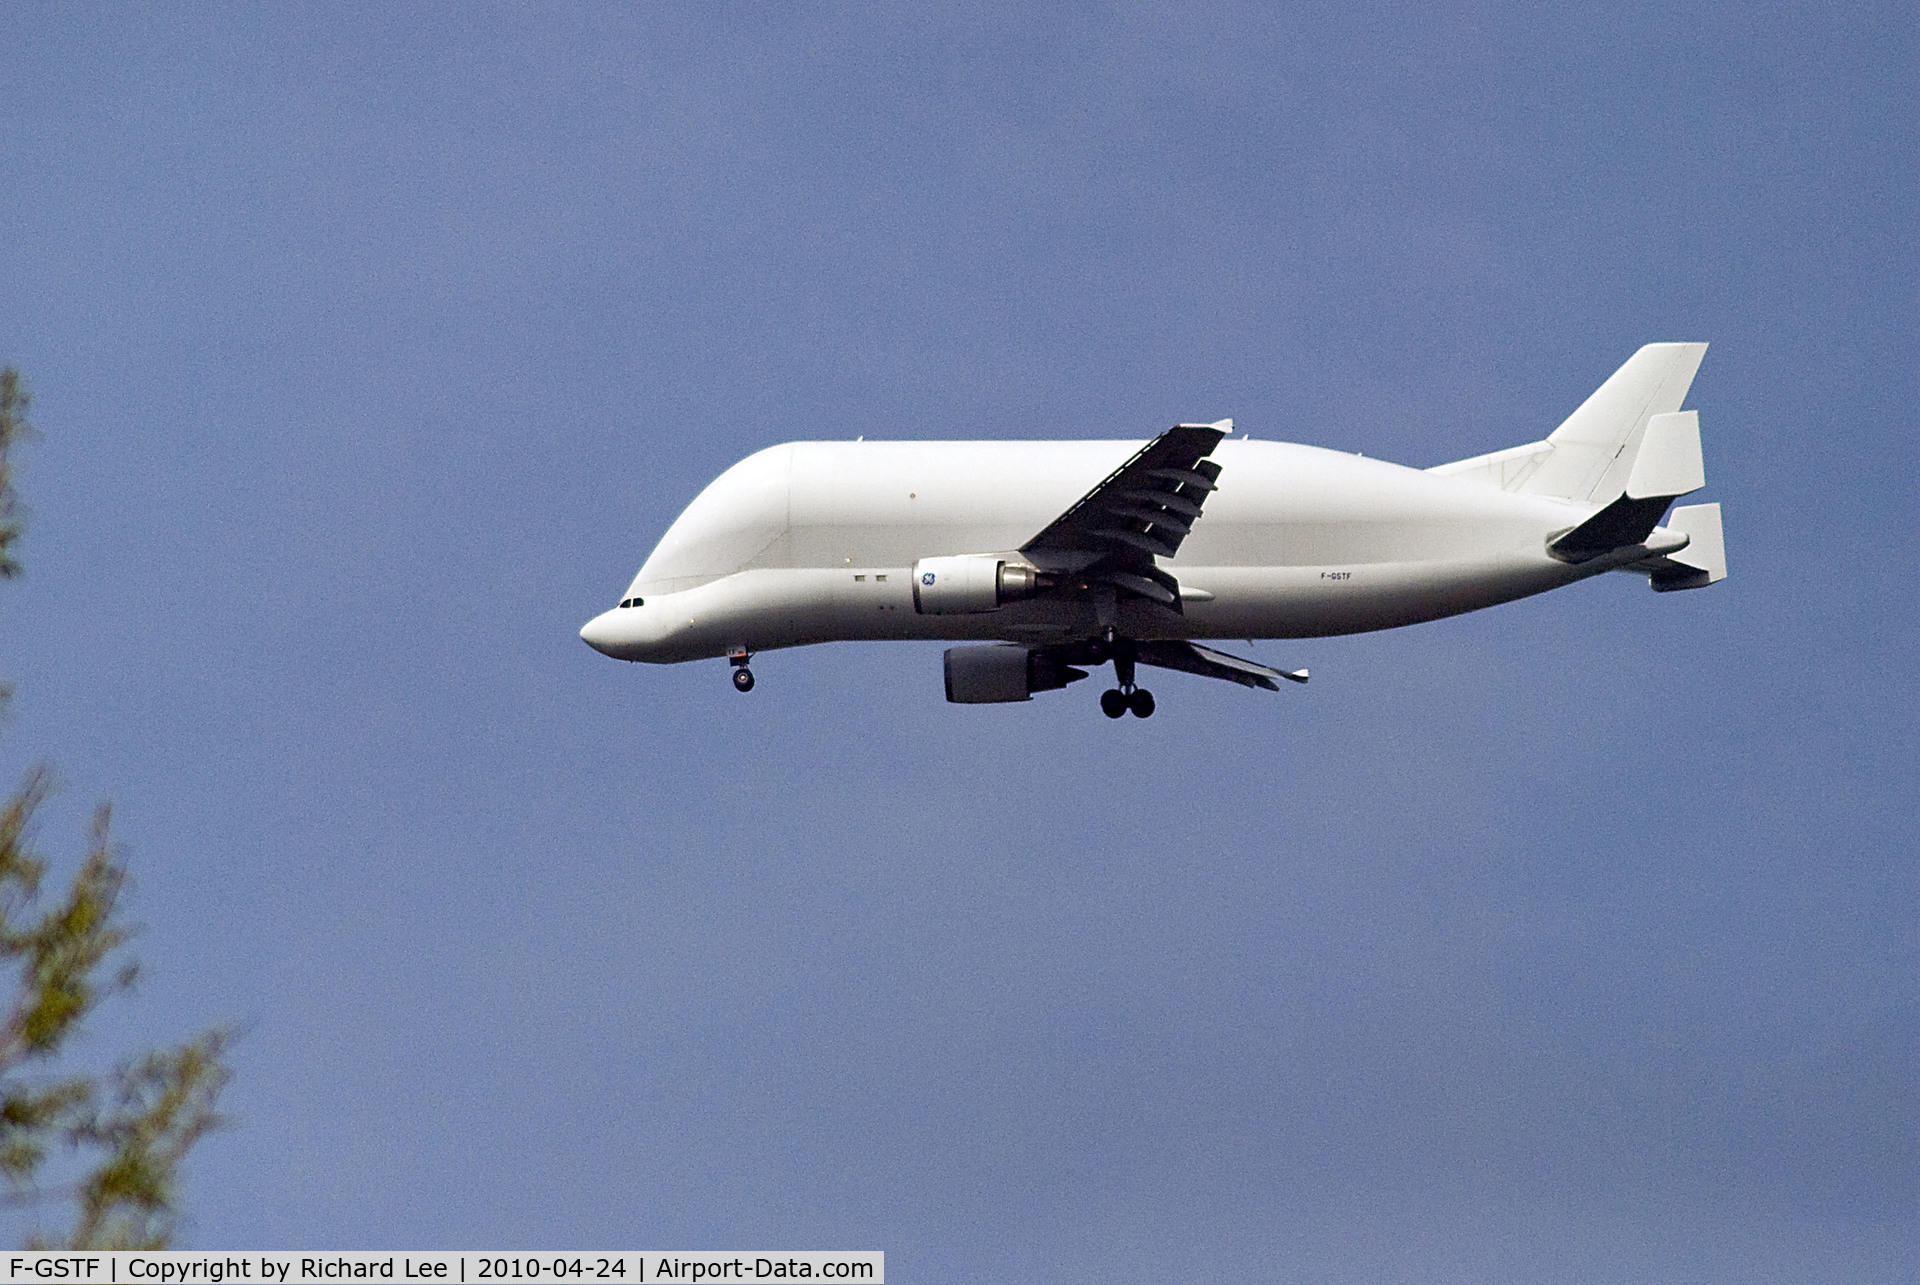 F-GSTF, 2000 Airbus A300B4-608ST Super Transporter C/N 796, Flying over Chester Zoo (UK) Liverpool Bound?